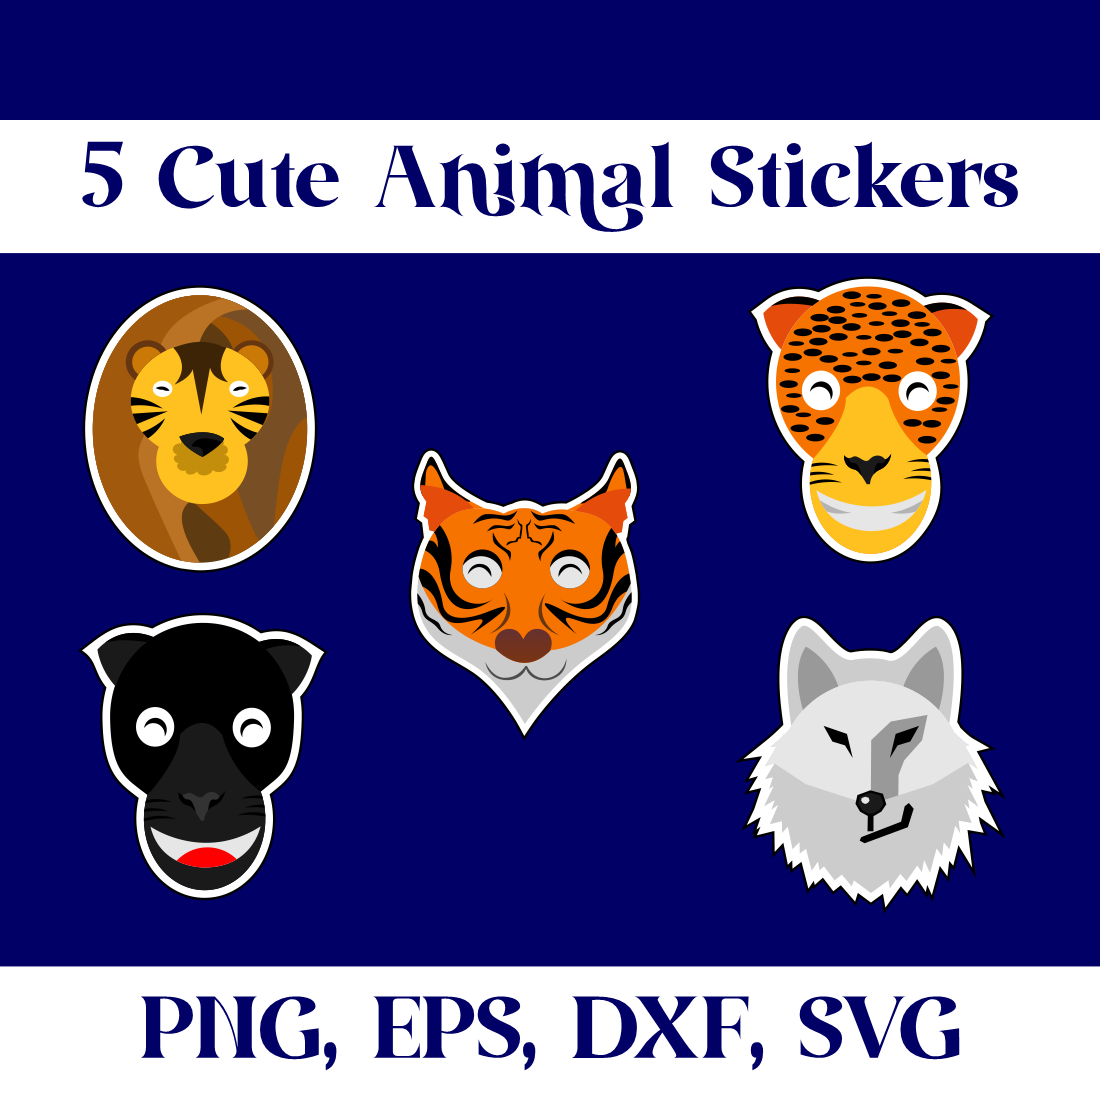 5 Cute Animal Stickers for your preview image.